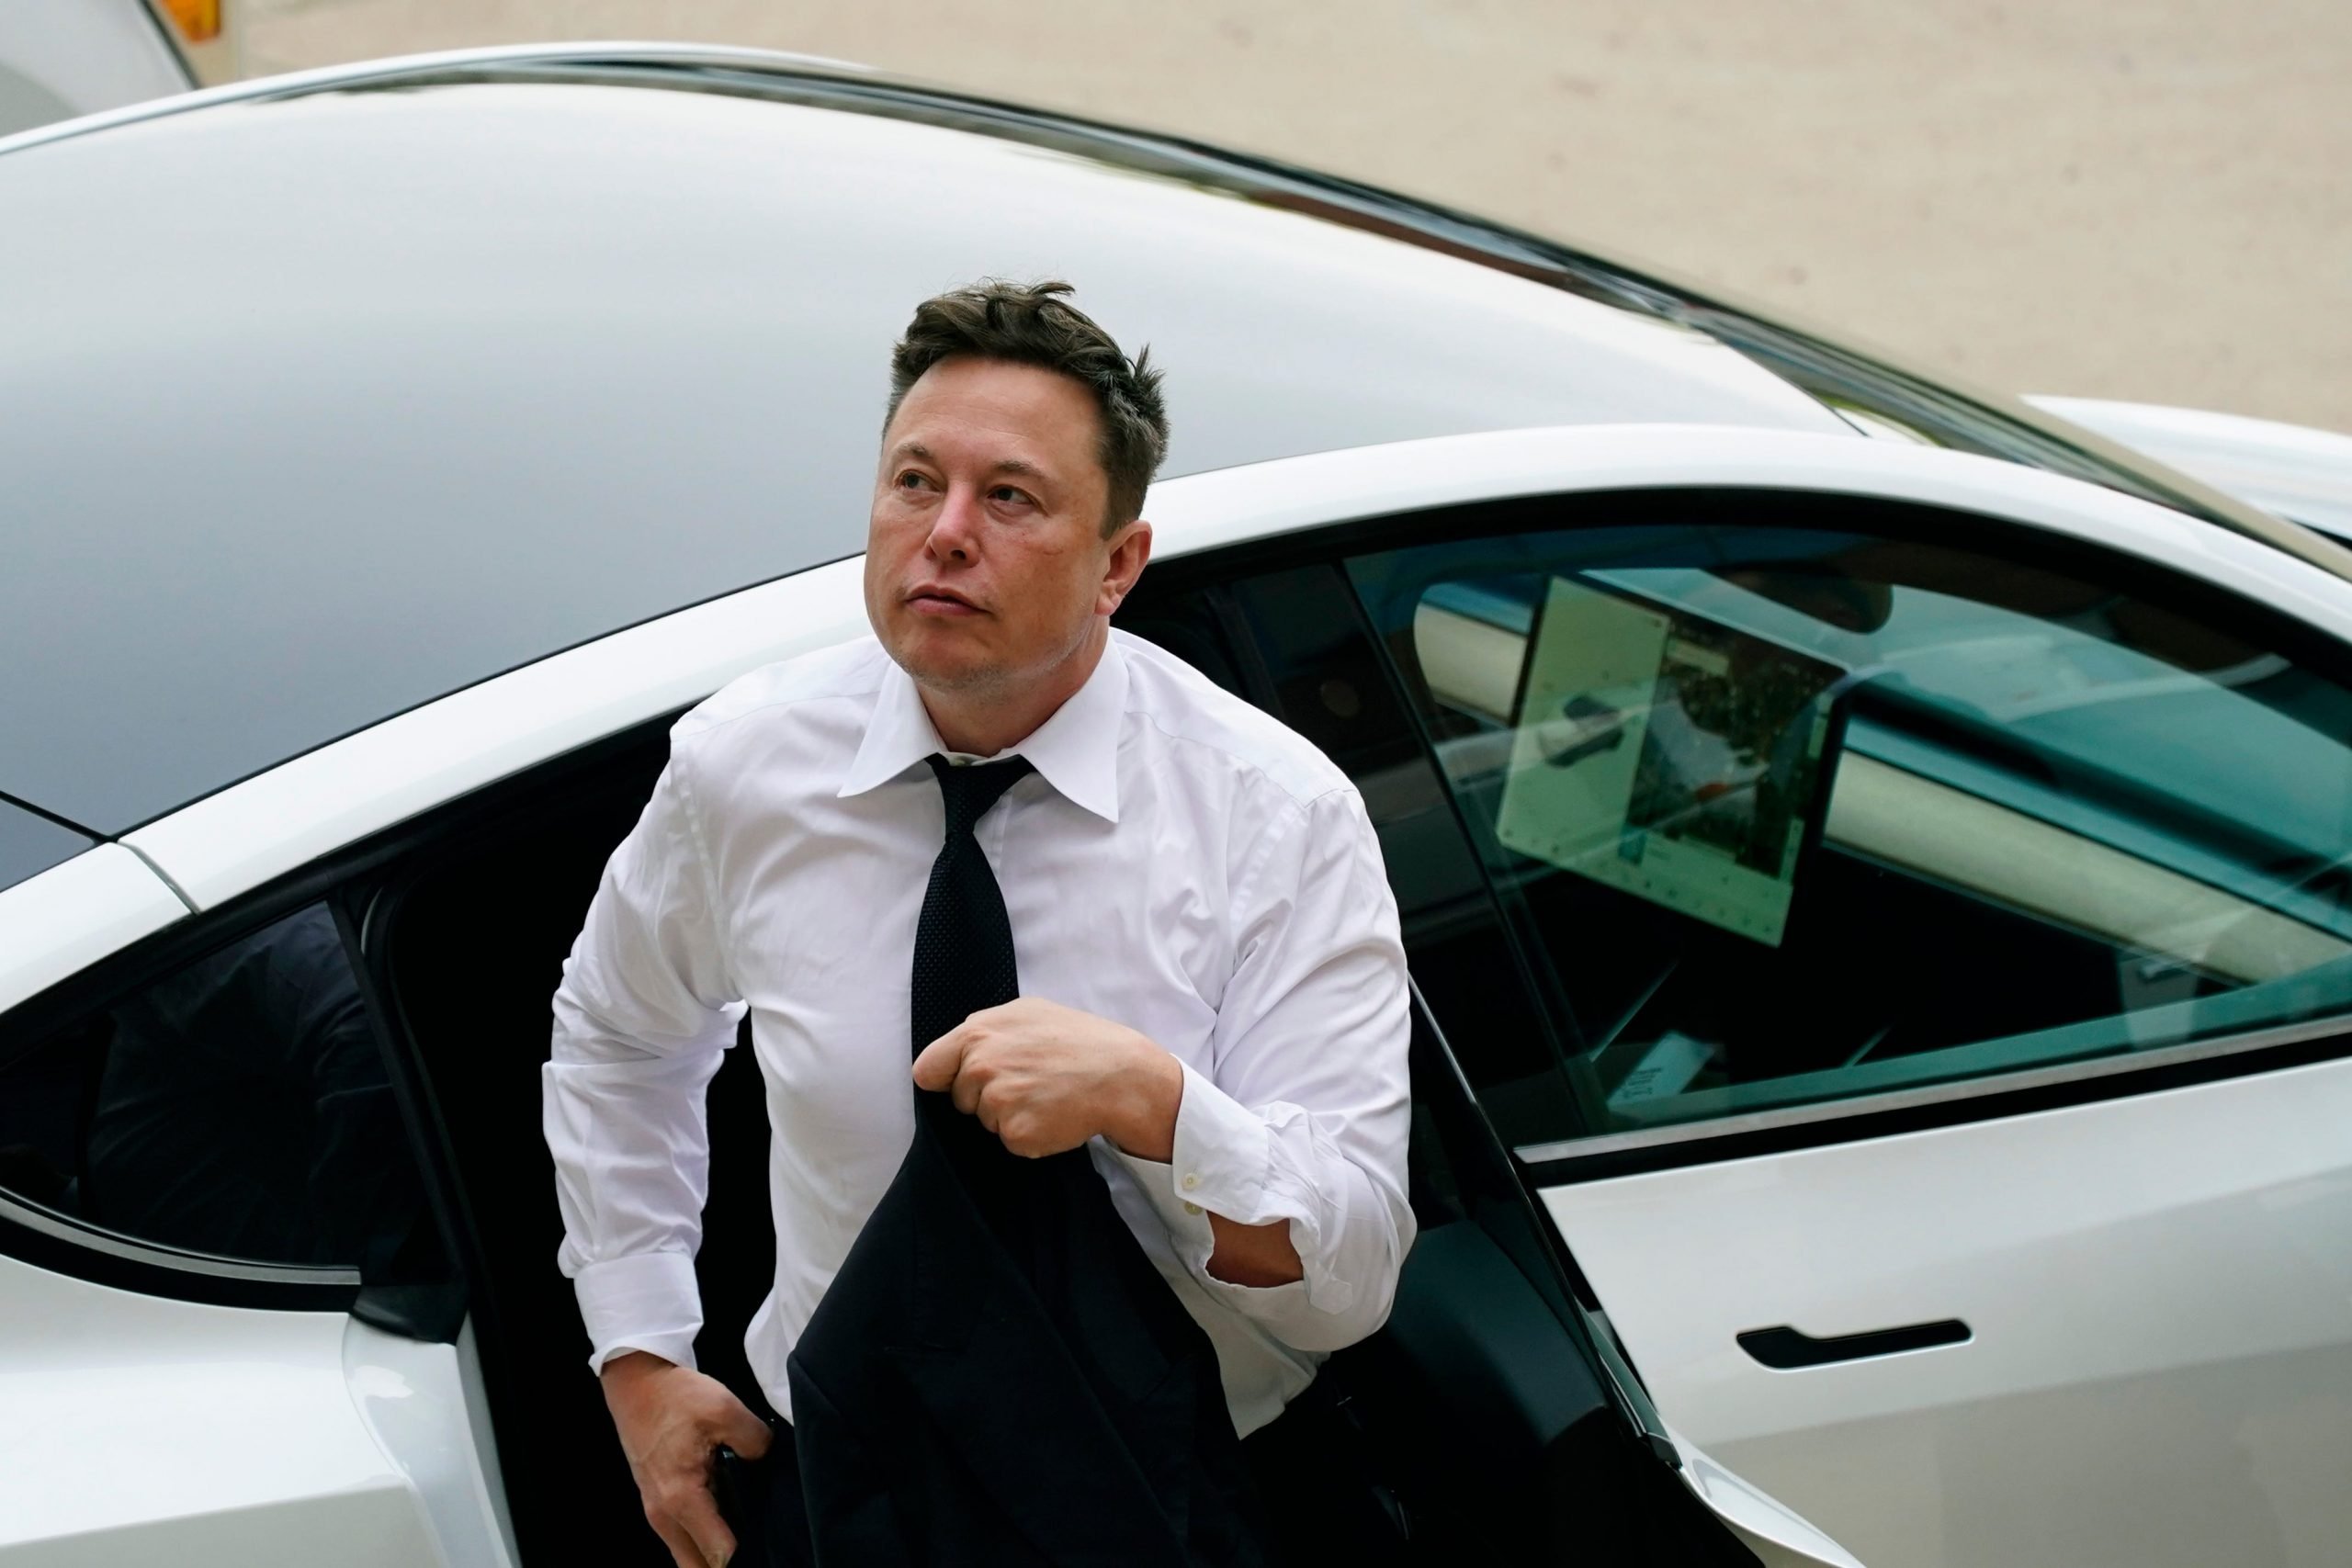 Tesla CEO Elon Musk in a white shirt and tie exits the backseat of a white Tesla